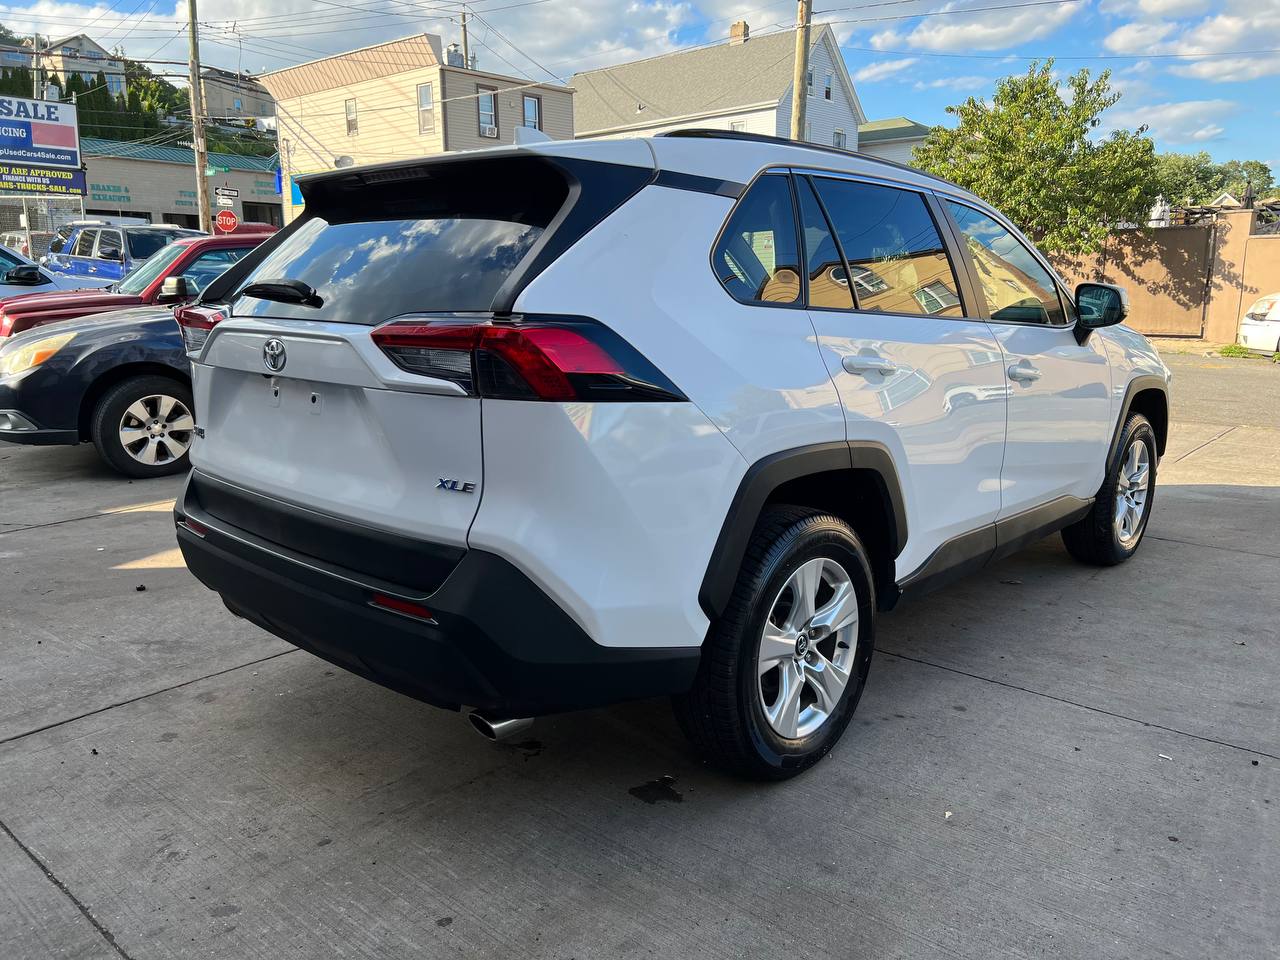 Used - Toyota RAV4 XLE SUV for sale in Staten Island NY